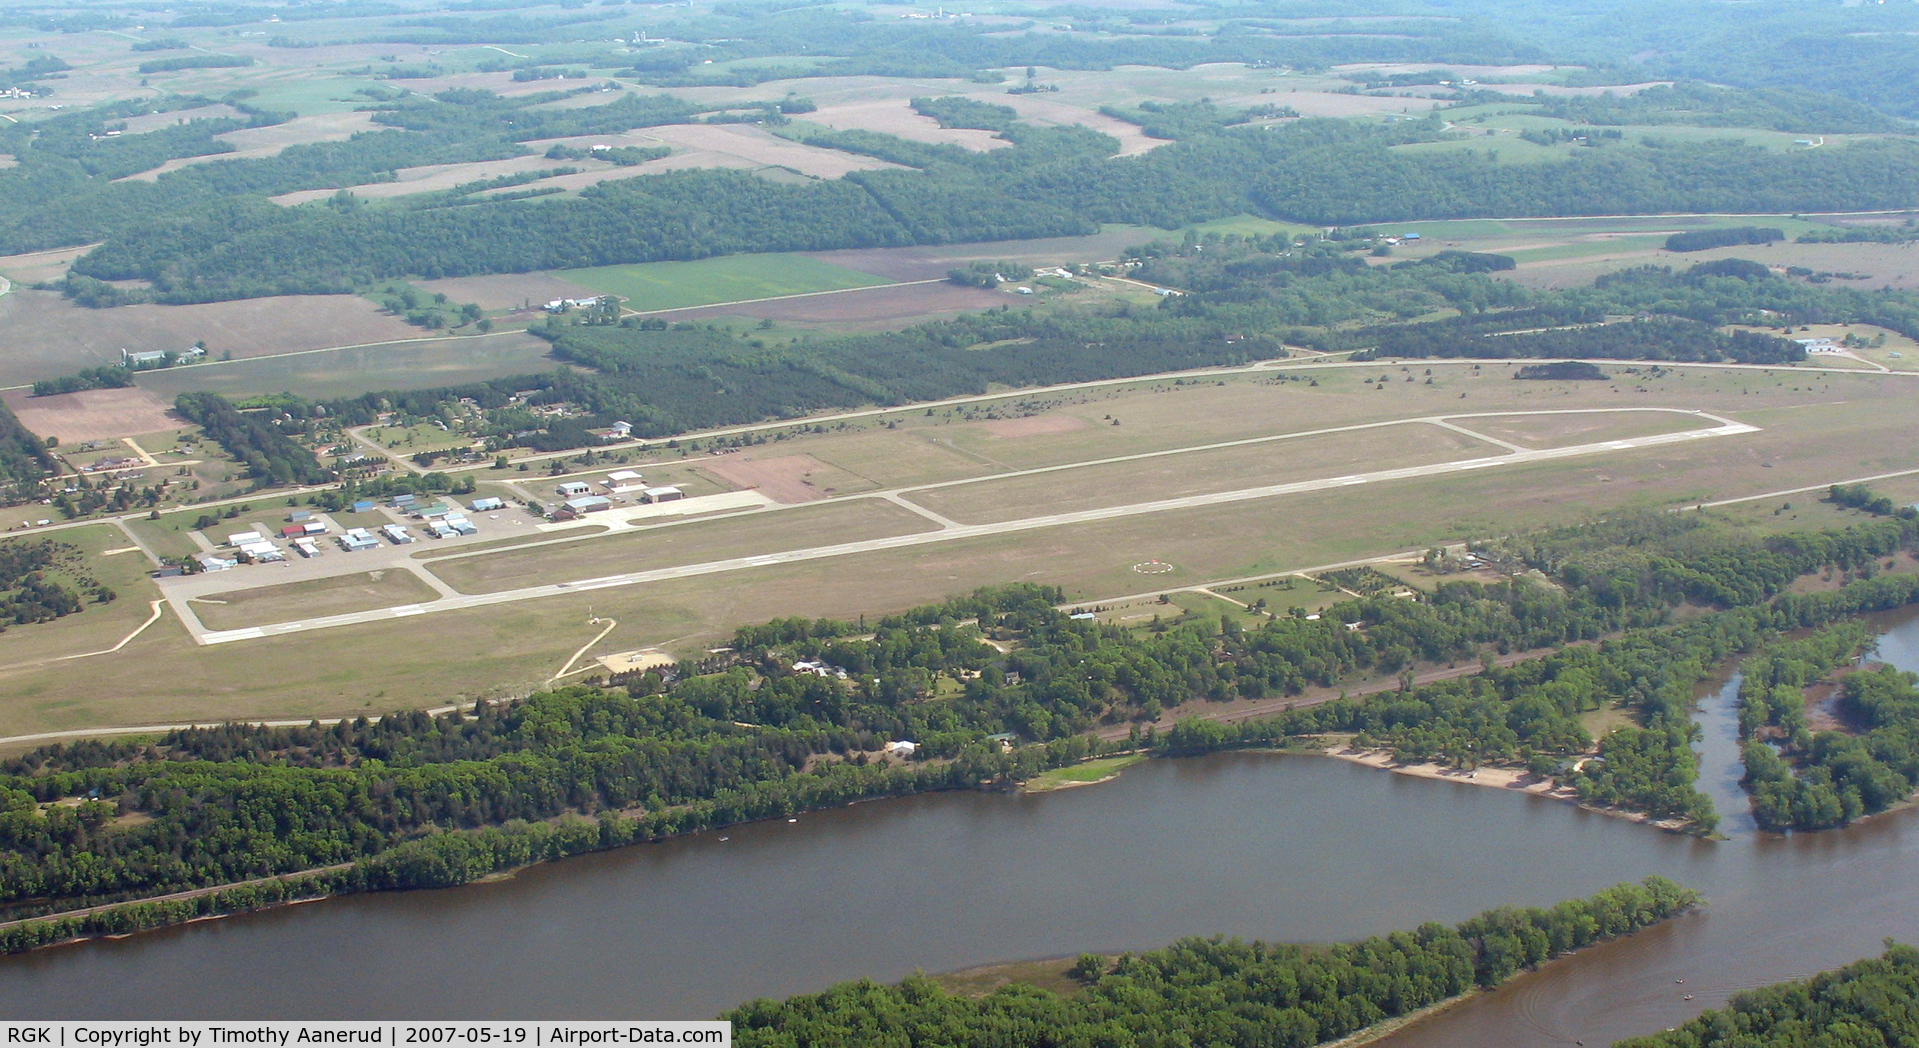 Red Wing Regional Airport (RGK) - From the west, a Minnesota Airport that is actually in Wisconsin